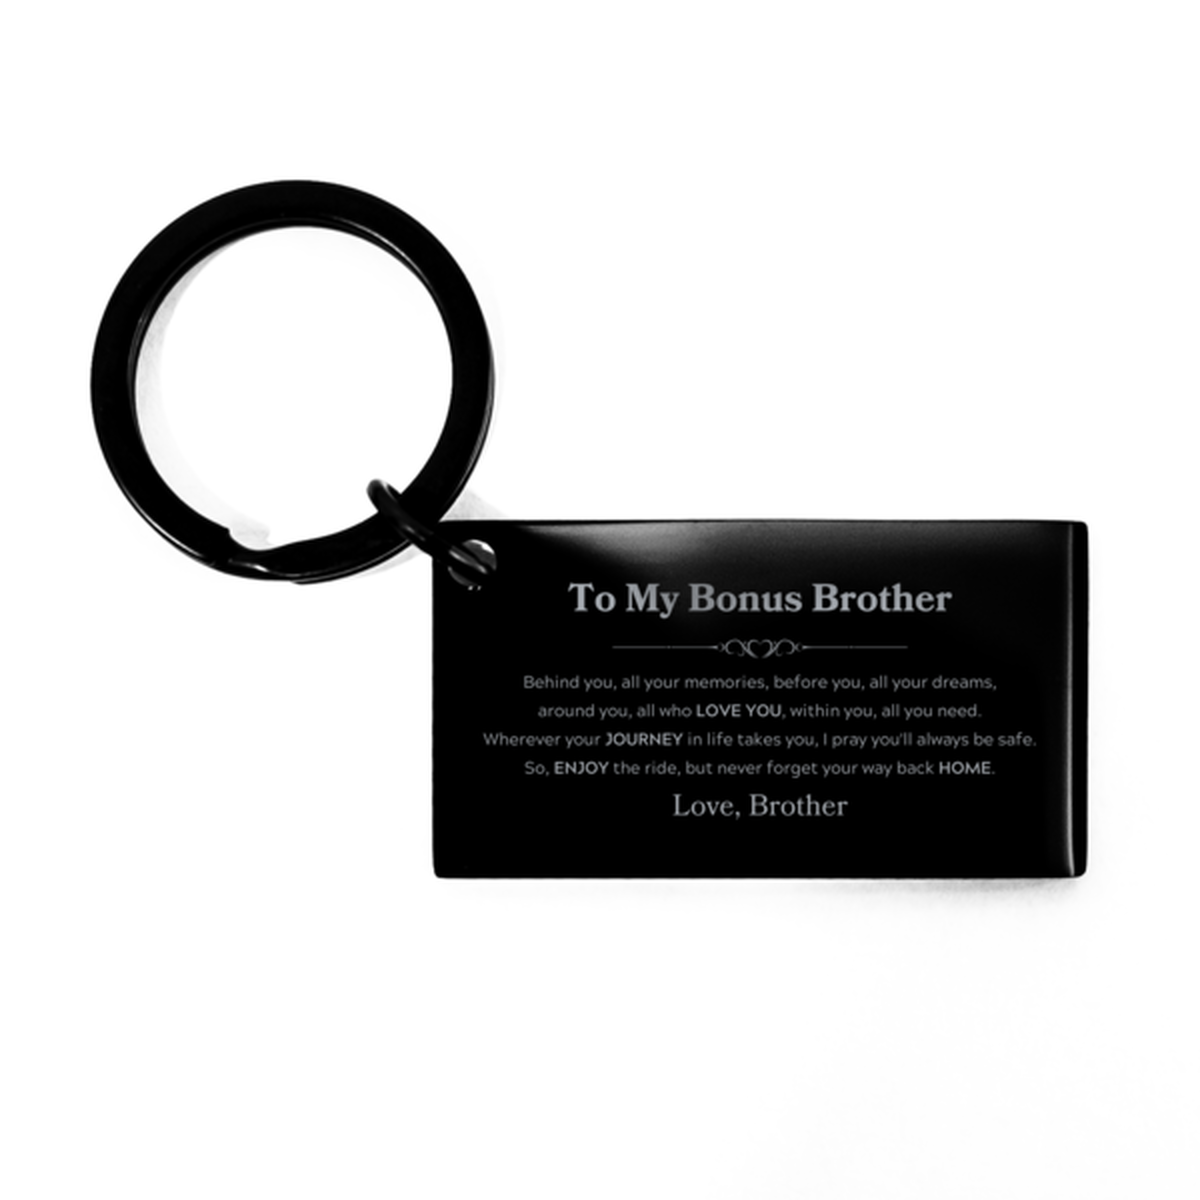 To My Bonus Brother Graduation Gifts from Brother, Bonus Brother Keychain Christmas Birthday Gifts for Bonus Brother Behind you, all your memories, before you, all your dreams. Love, Brother